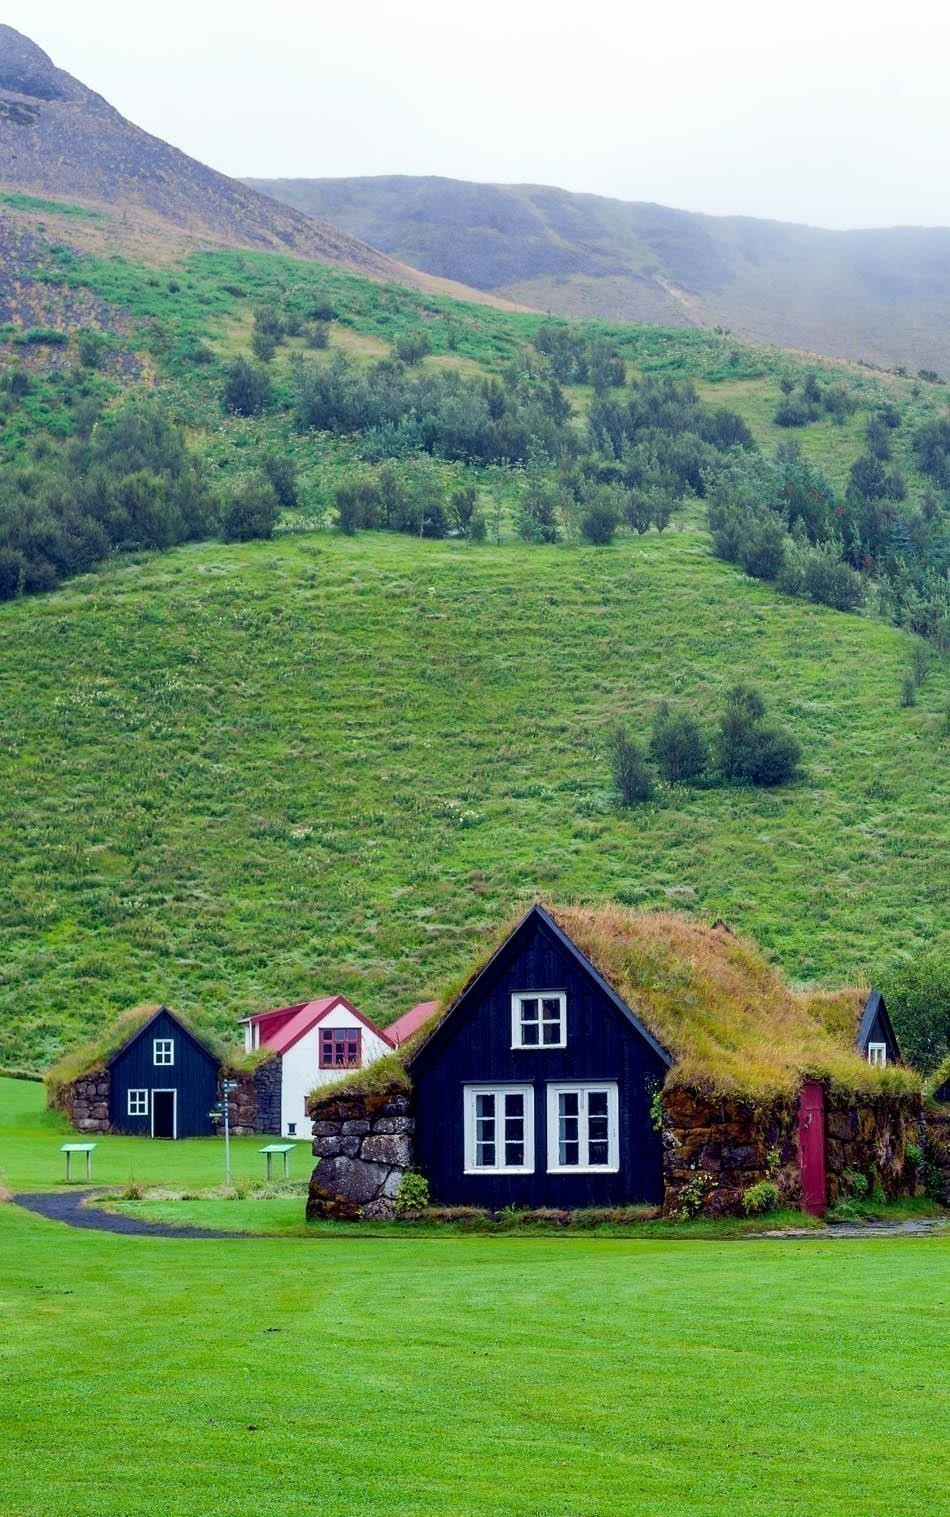 Traditional Icelandic House with grass roof in Skogar Folk Museum, Iceland | Iceland Travel Guide